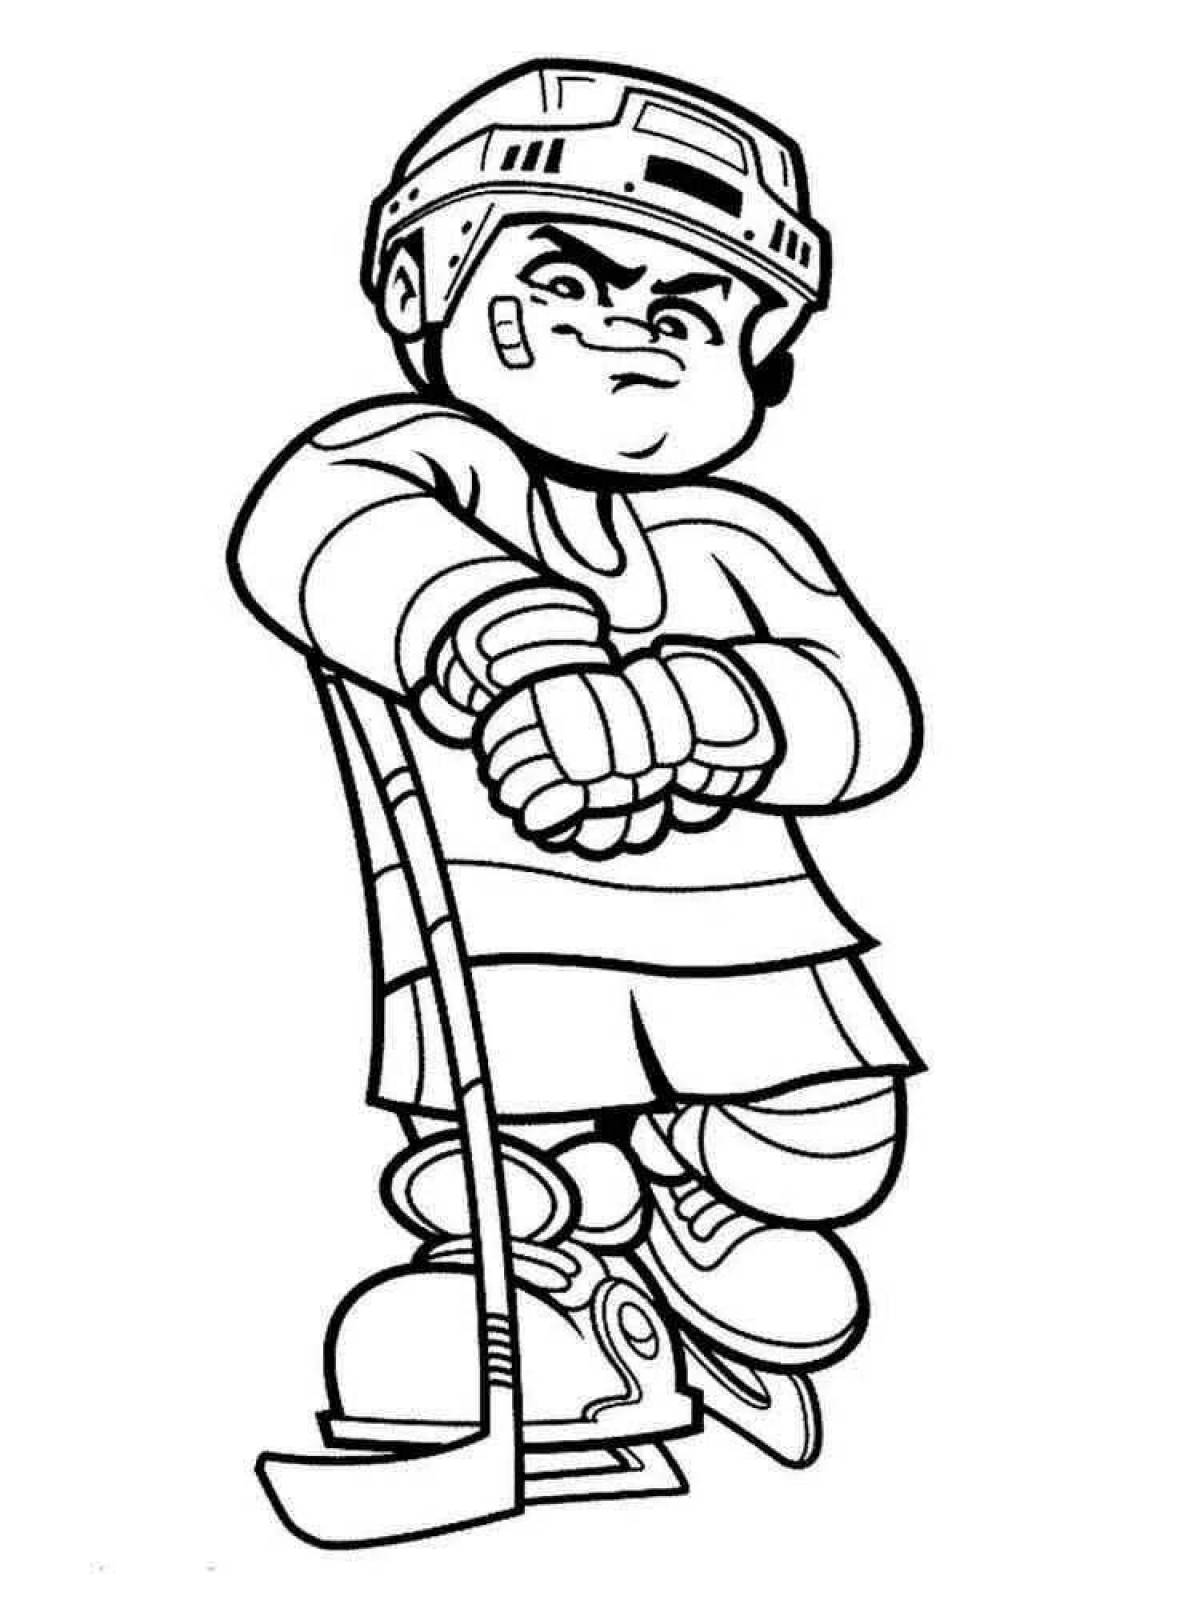 Hockey coloring page